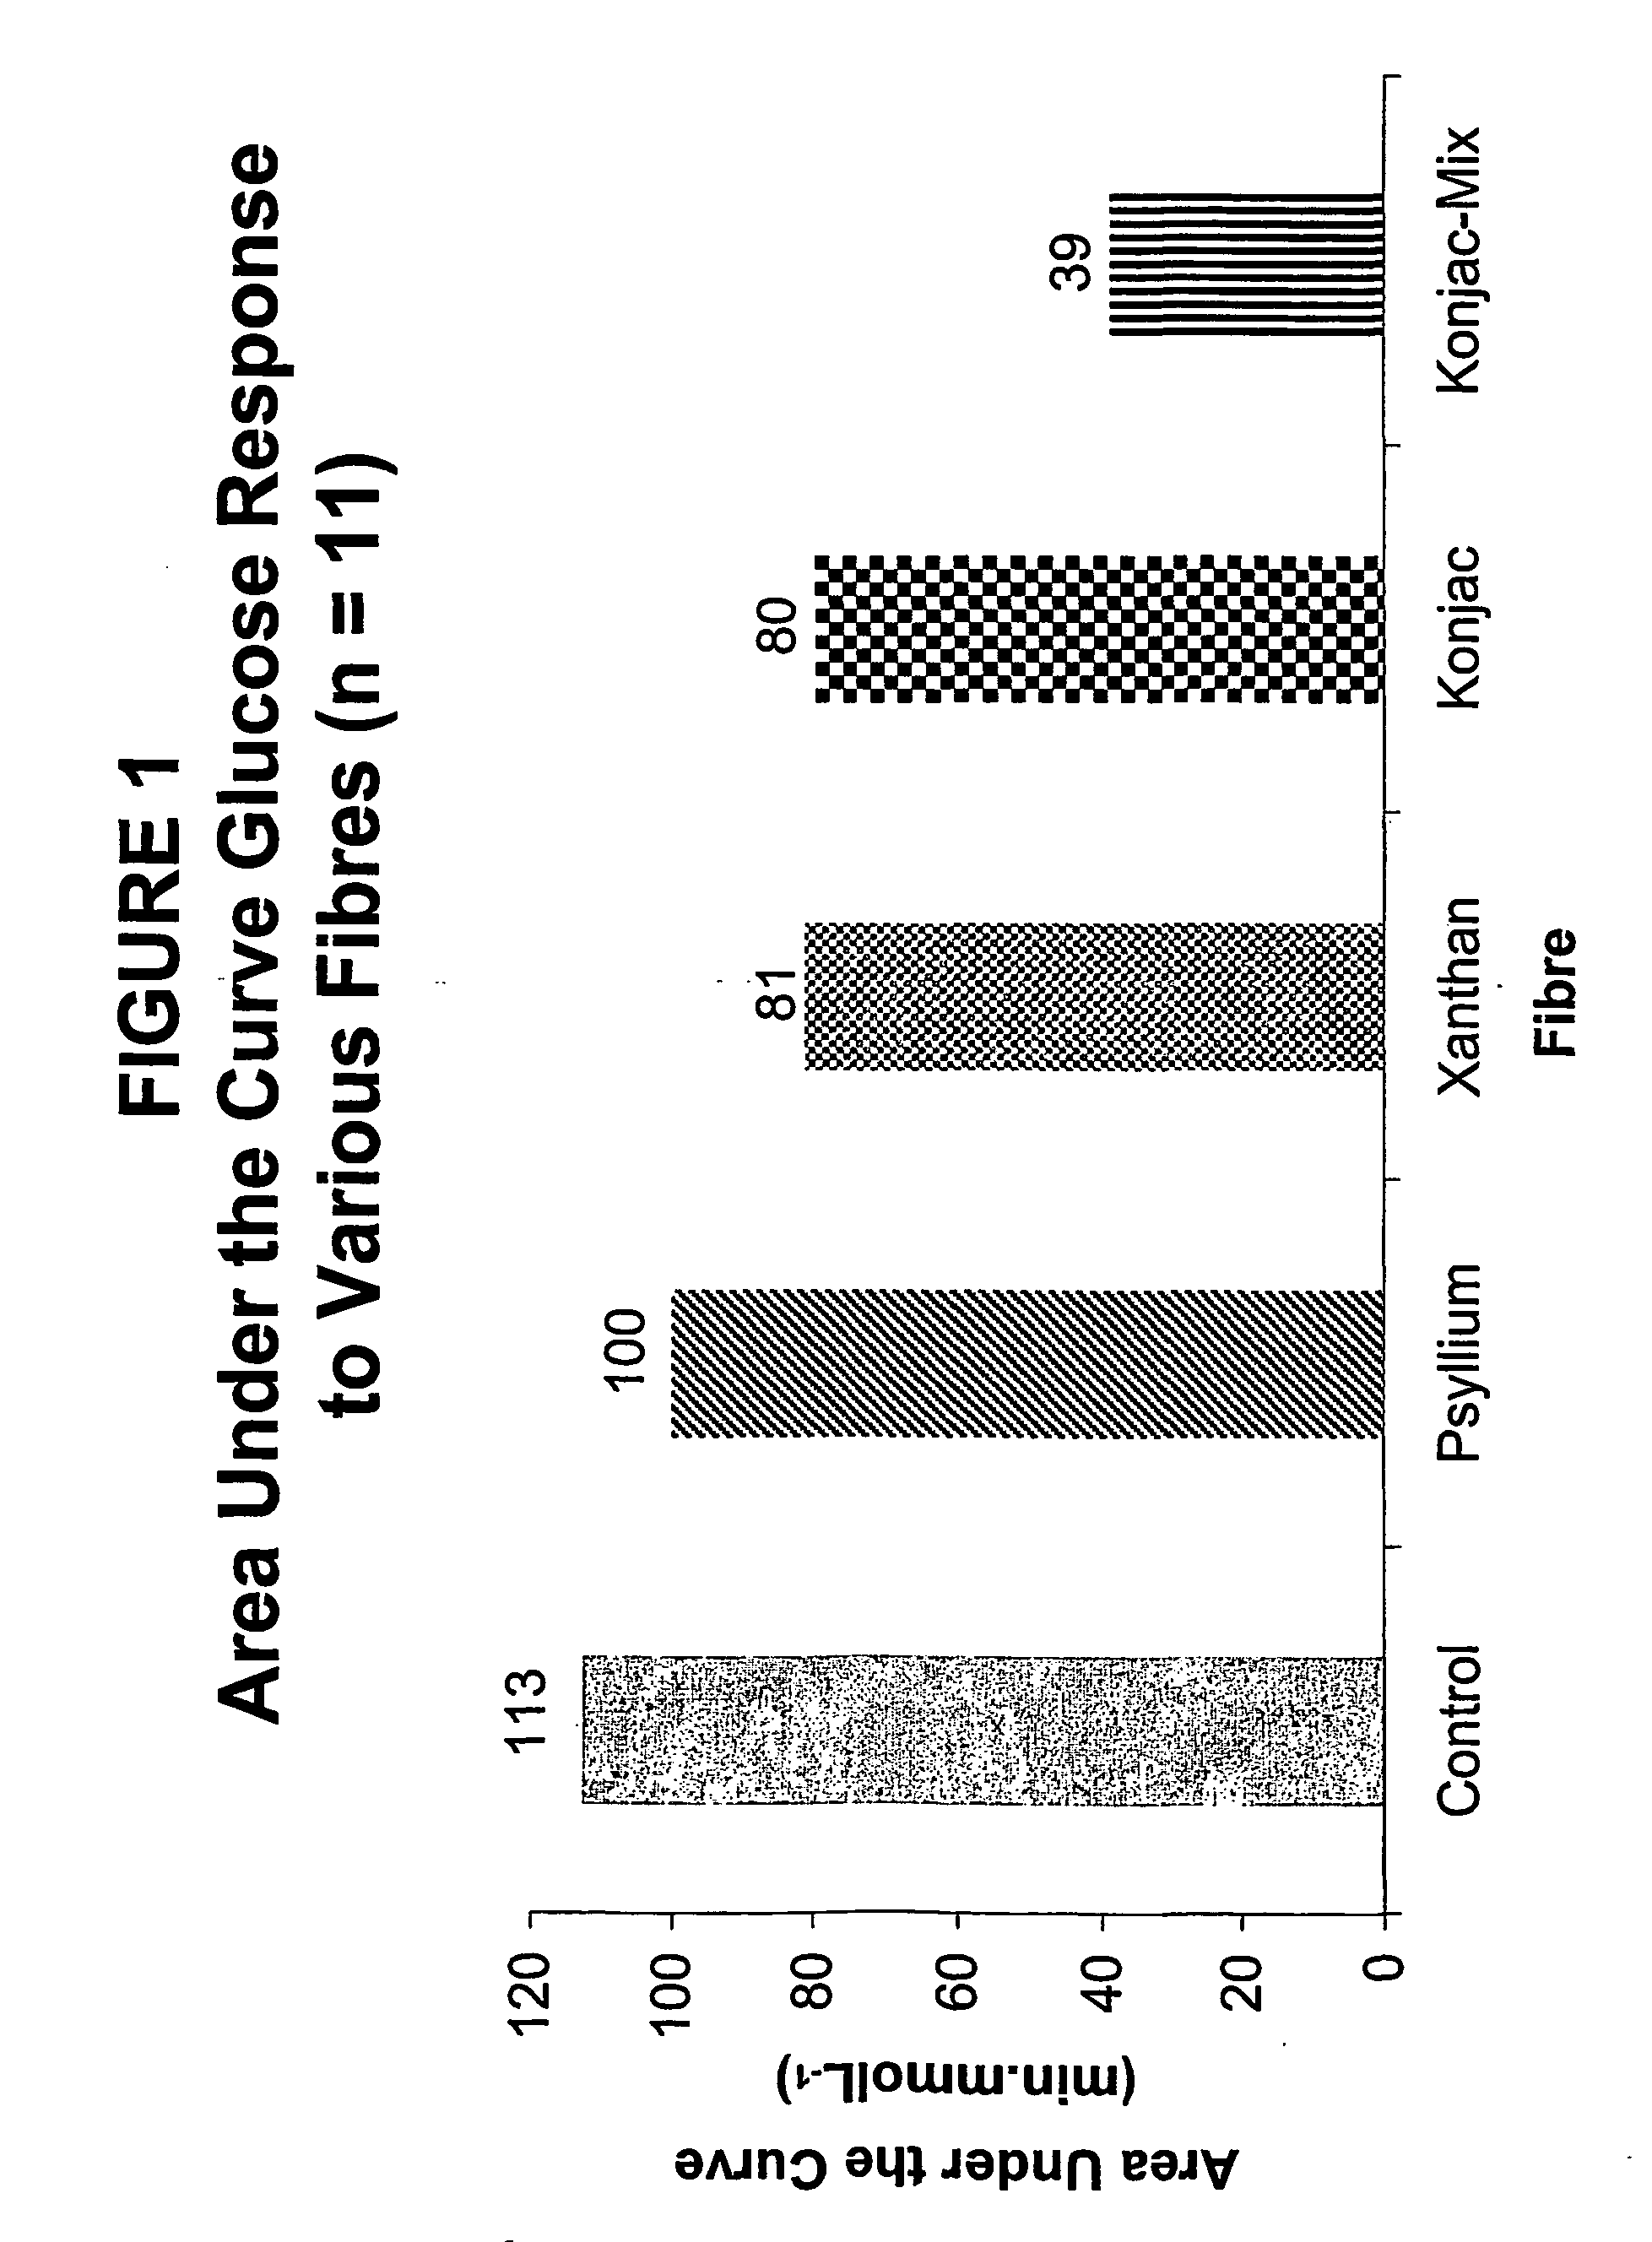 Konjac mannan and ginseng compositions and methods and uses thereof